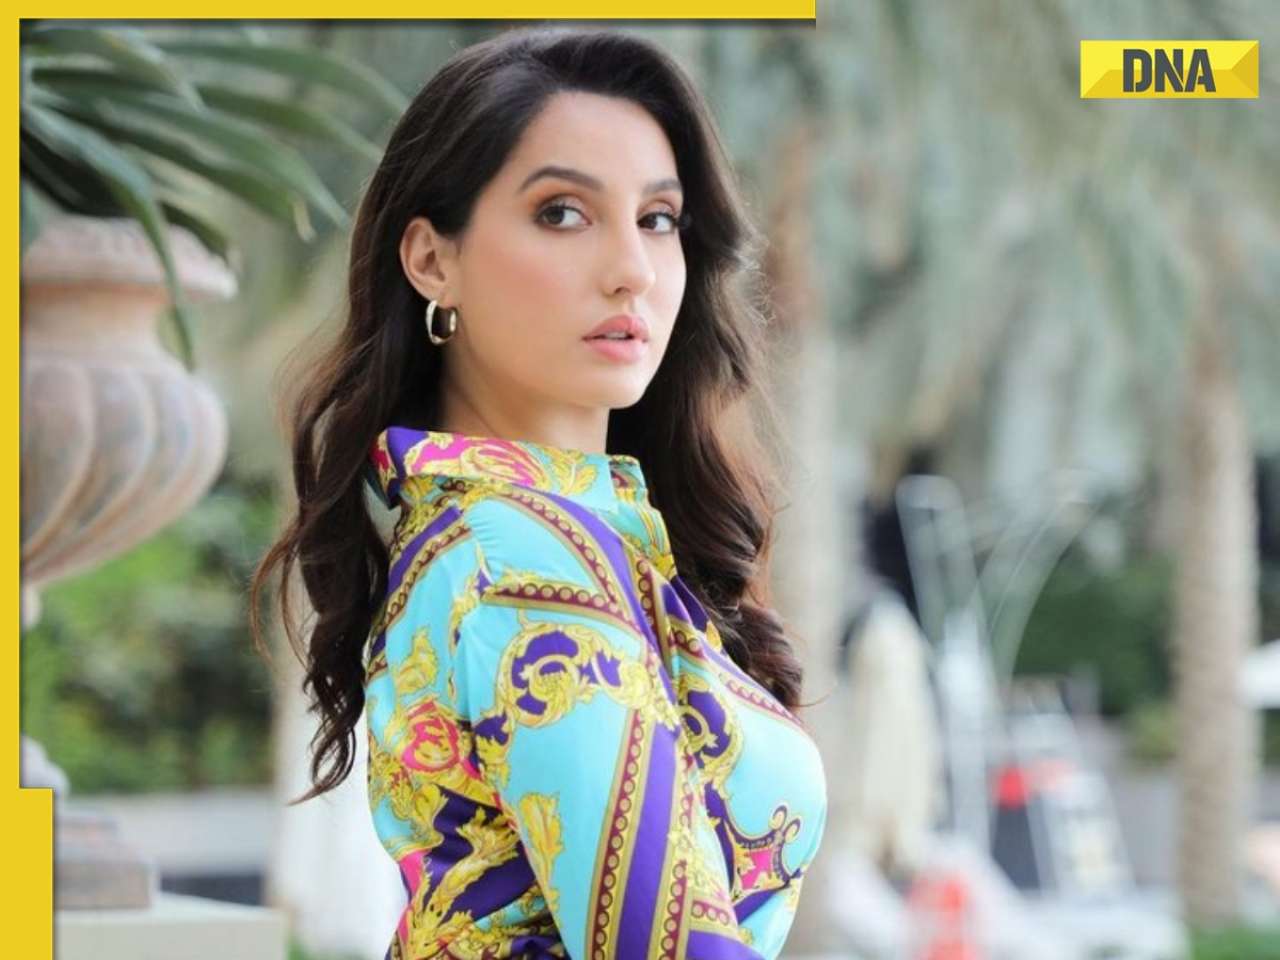 Nora Fatehi claims most Bollywood couples get married to stay relevant: 'People use their wives, husbands for...'